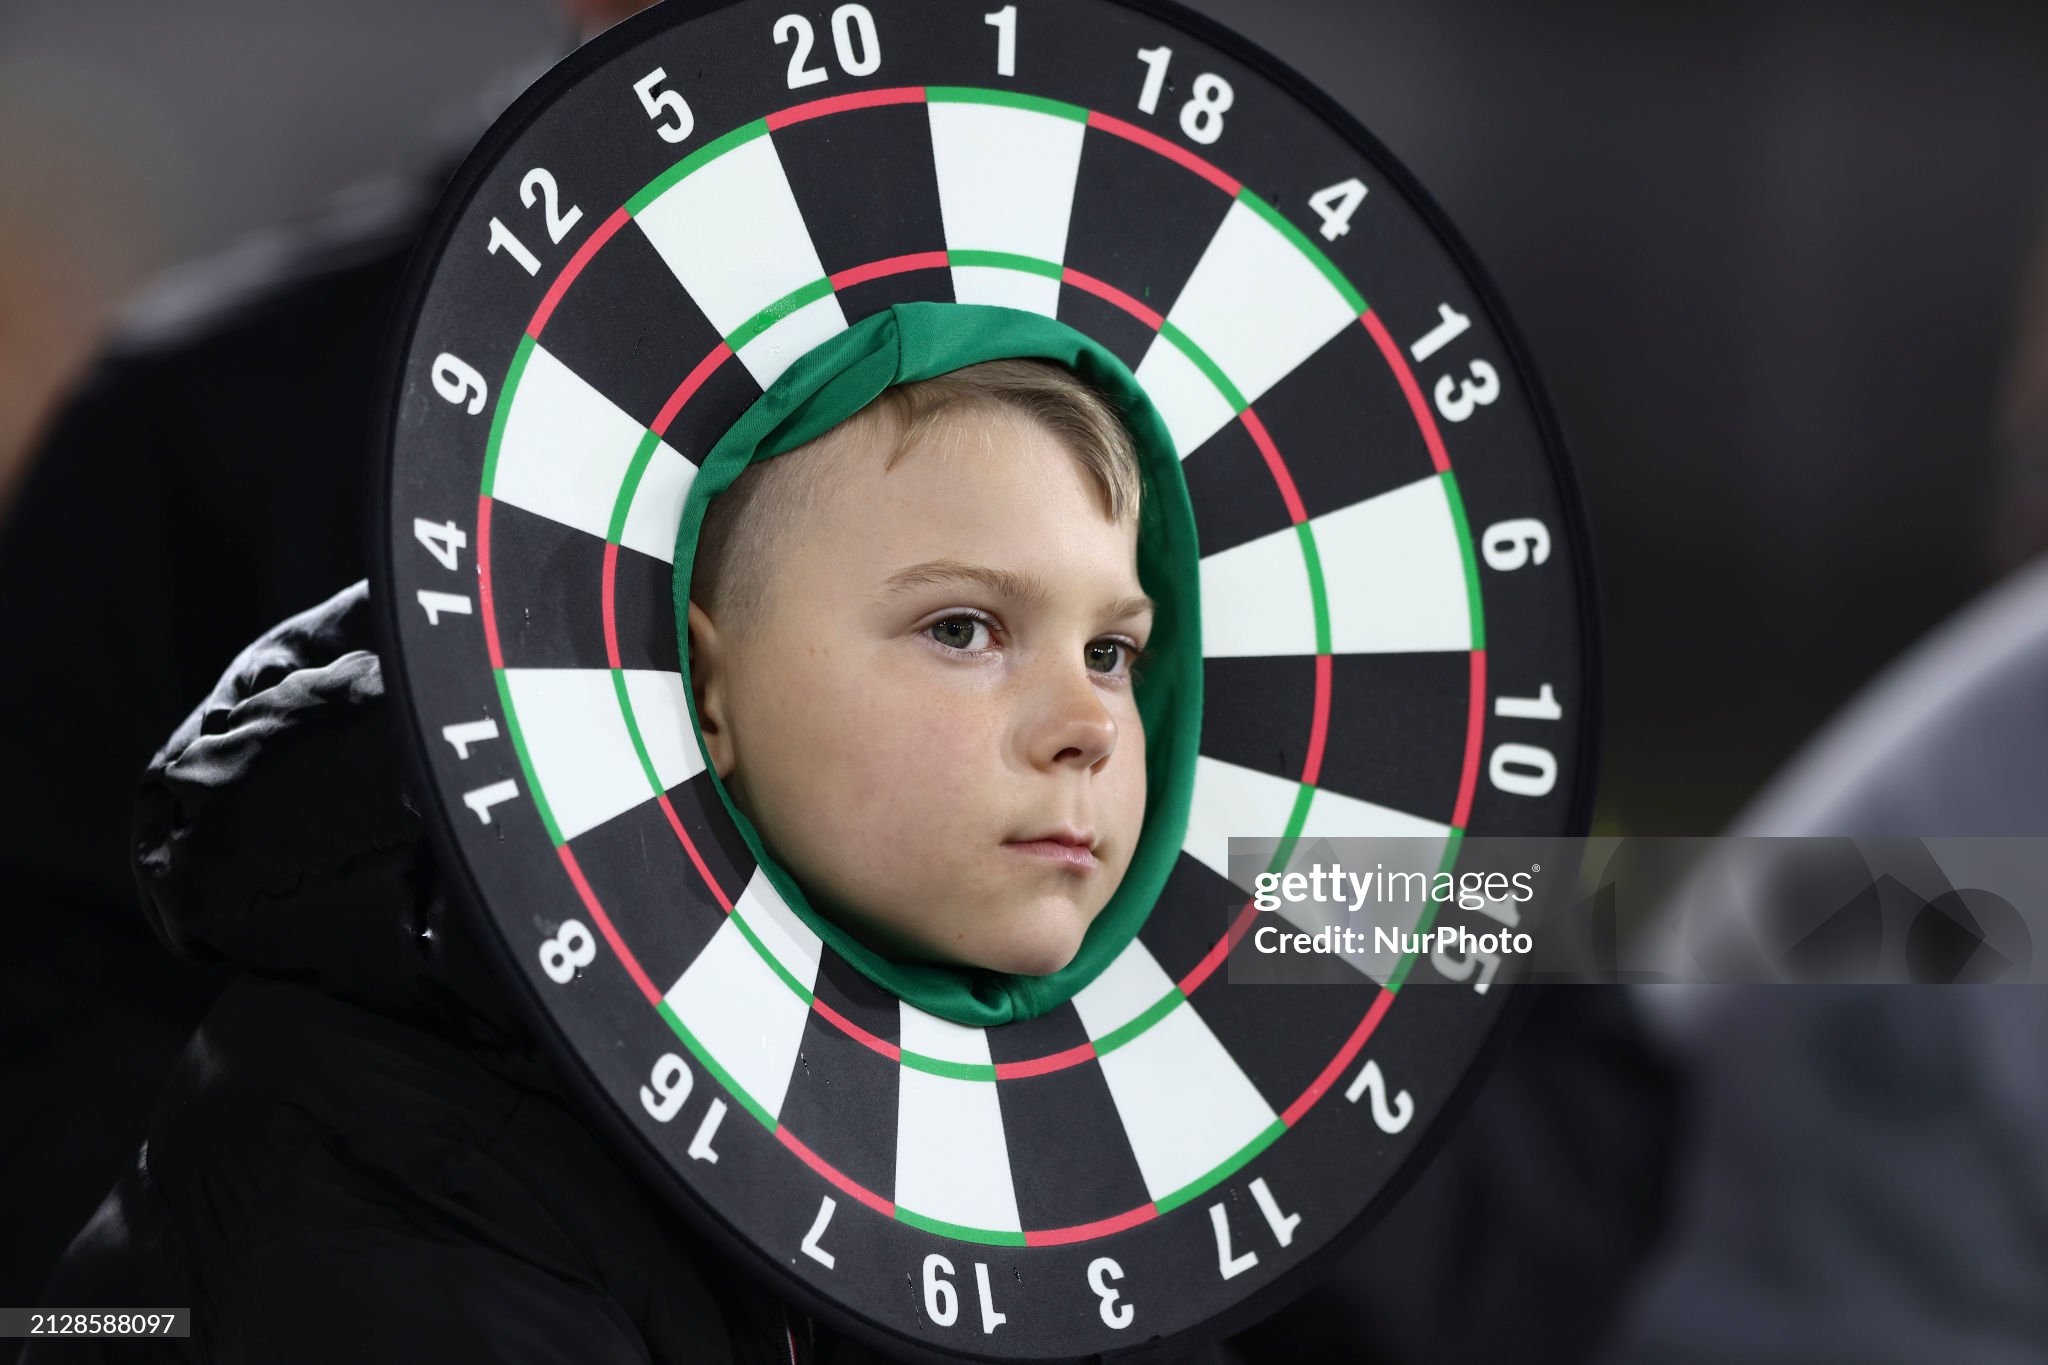 gettyimages-2128588097-2048x2048.jpg